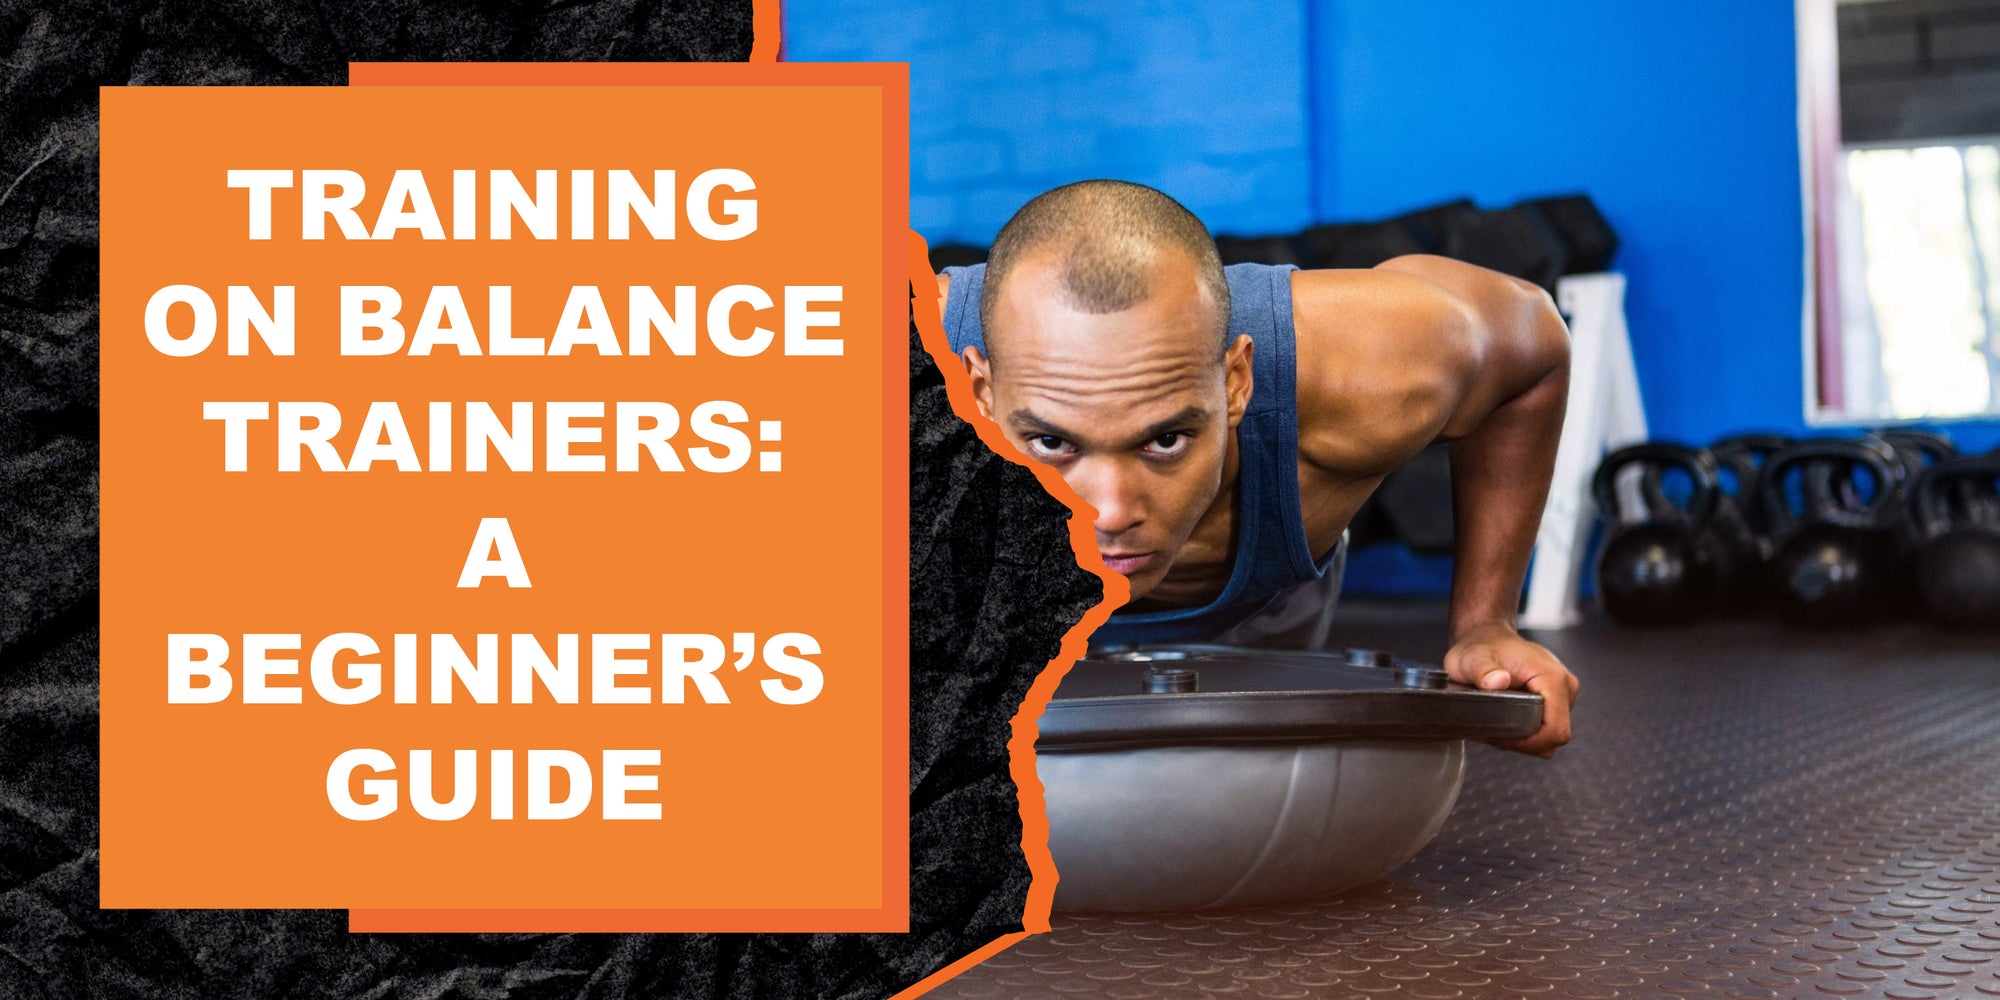 Training on Balance Trainers: A Beginner’s Guide